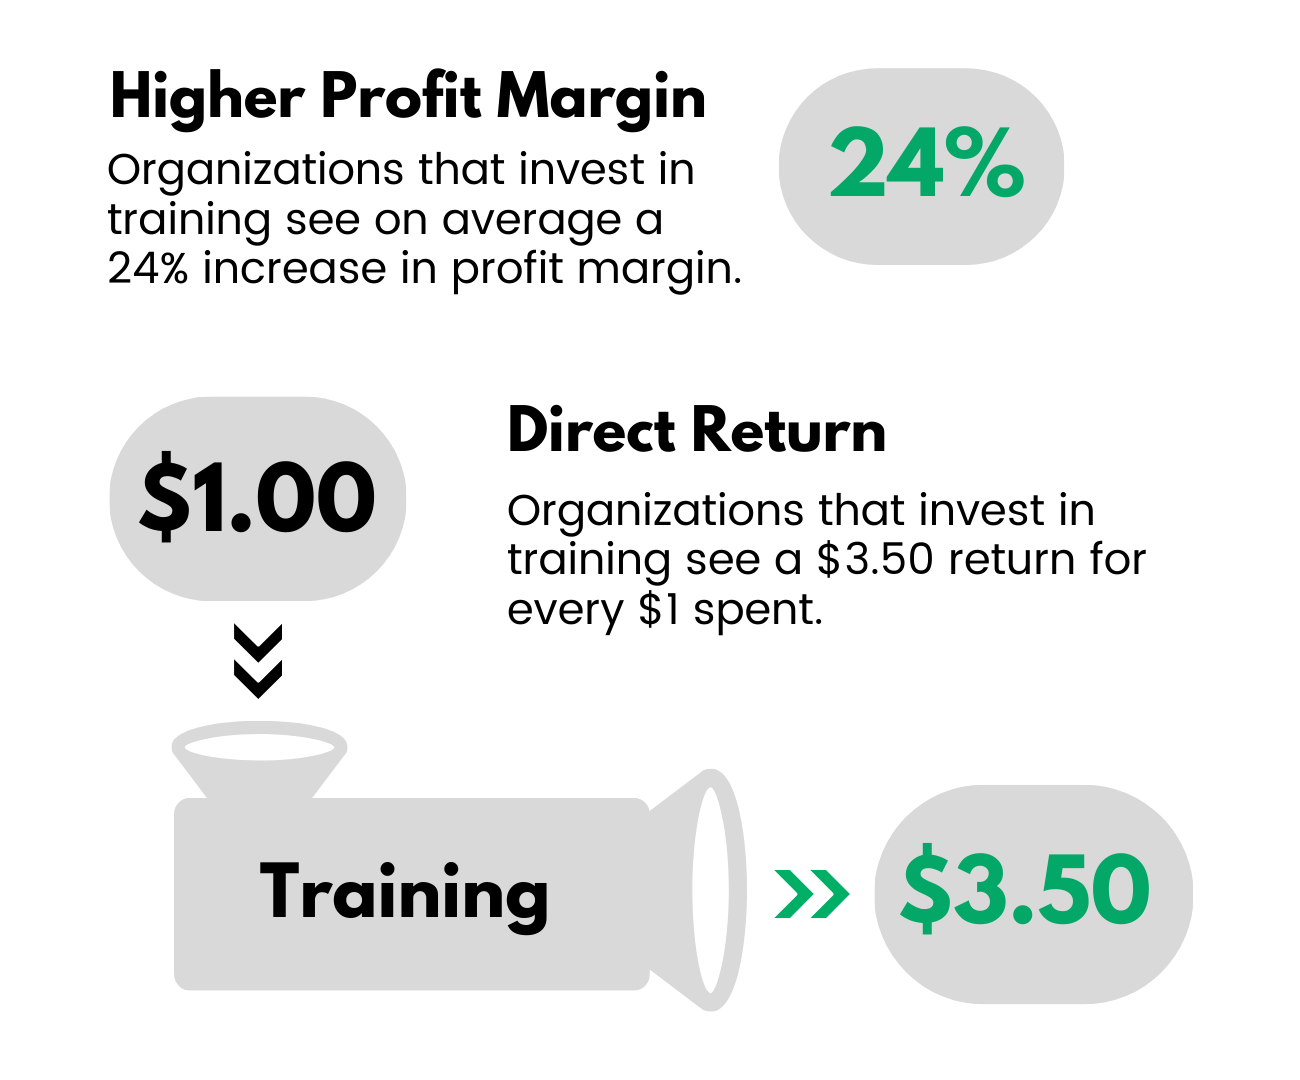 Organizations who train employees see a 24% increase in profit margin and see $3.50 return for every $1 invested in training.